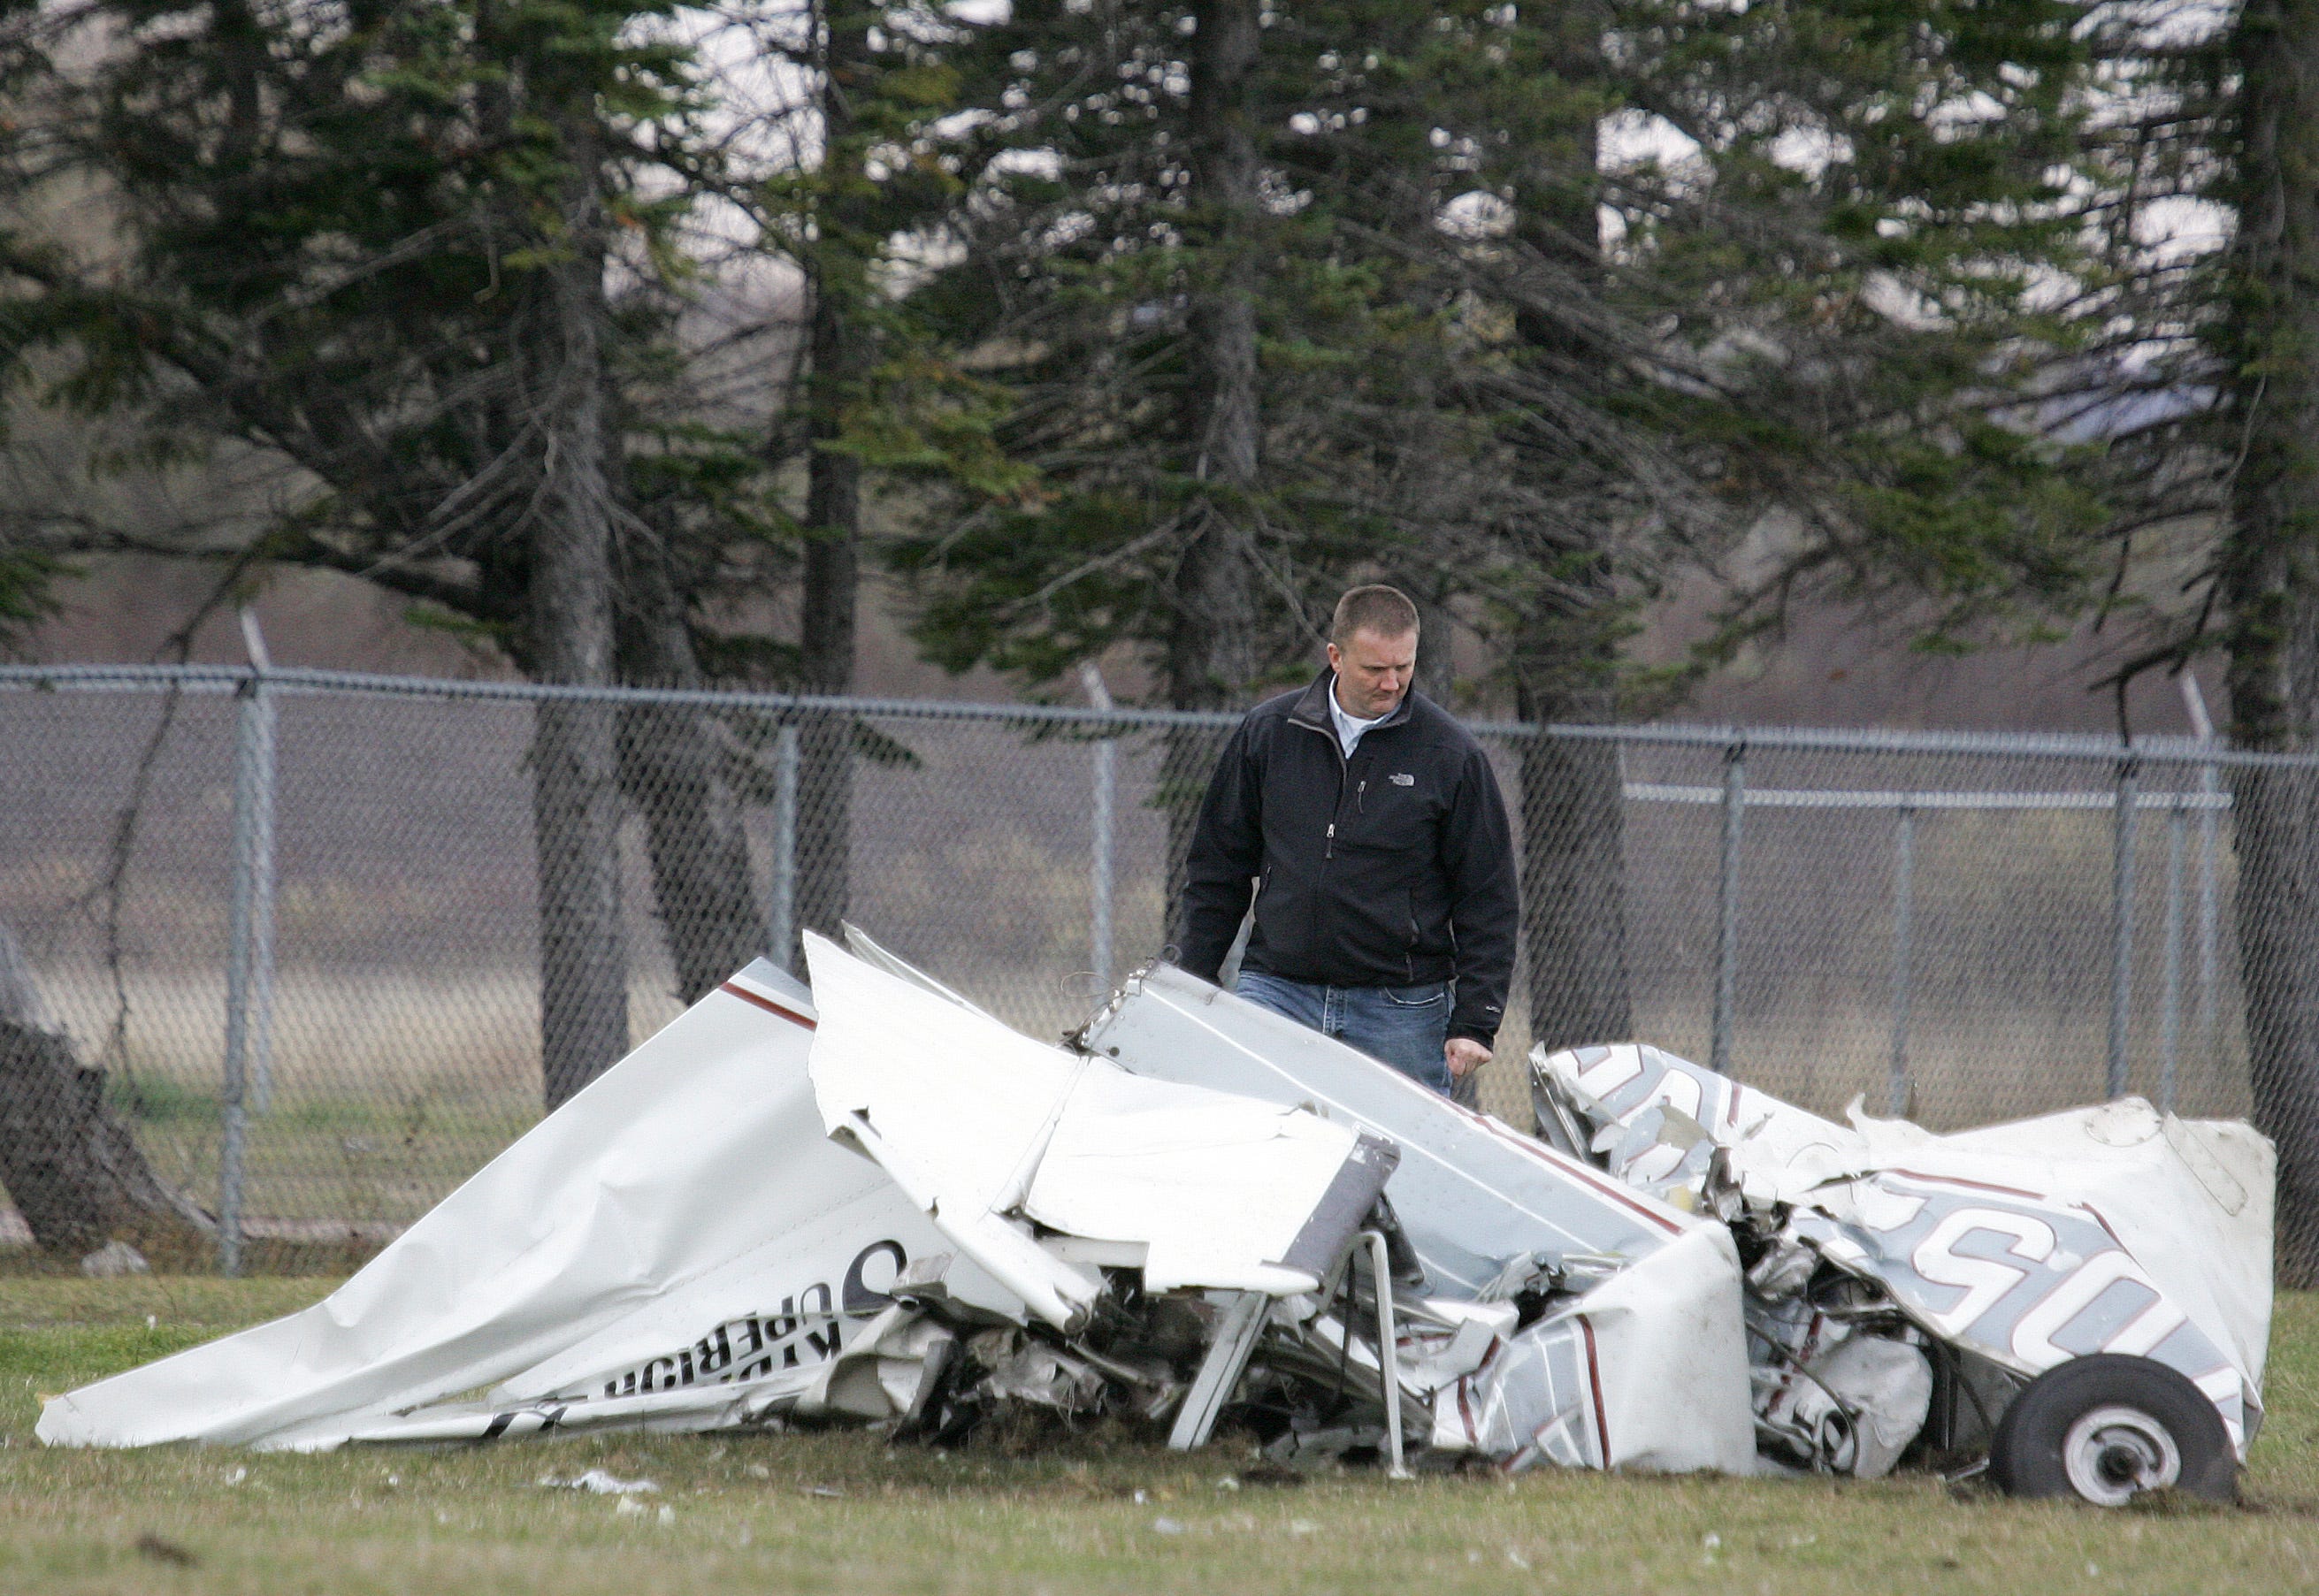 2 planes collide mid-air in Wis., everyone survives